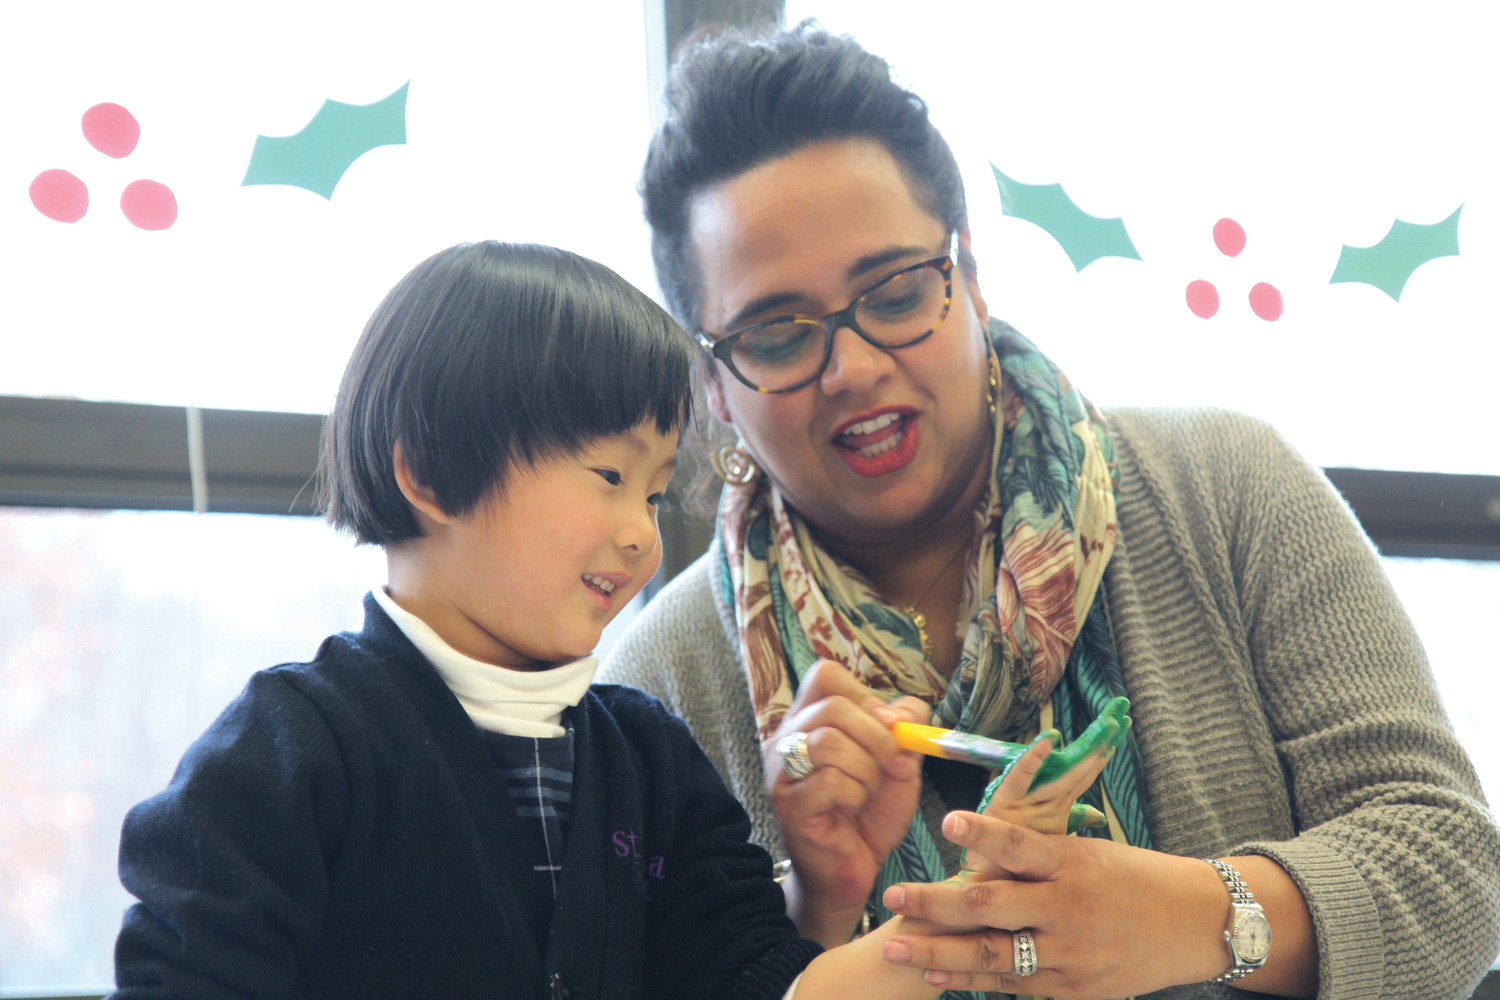 Volunteer Malin Marin-Bean works with St. Thomas Regional School student Claire Zhang during the after-school art club.